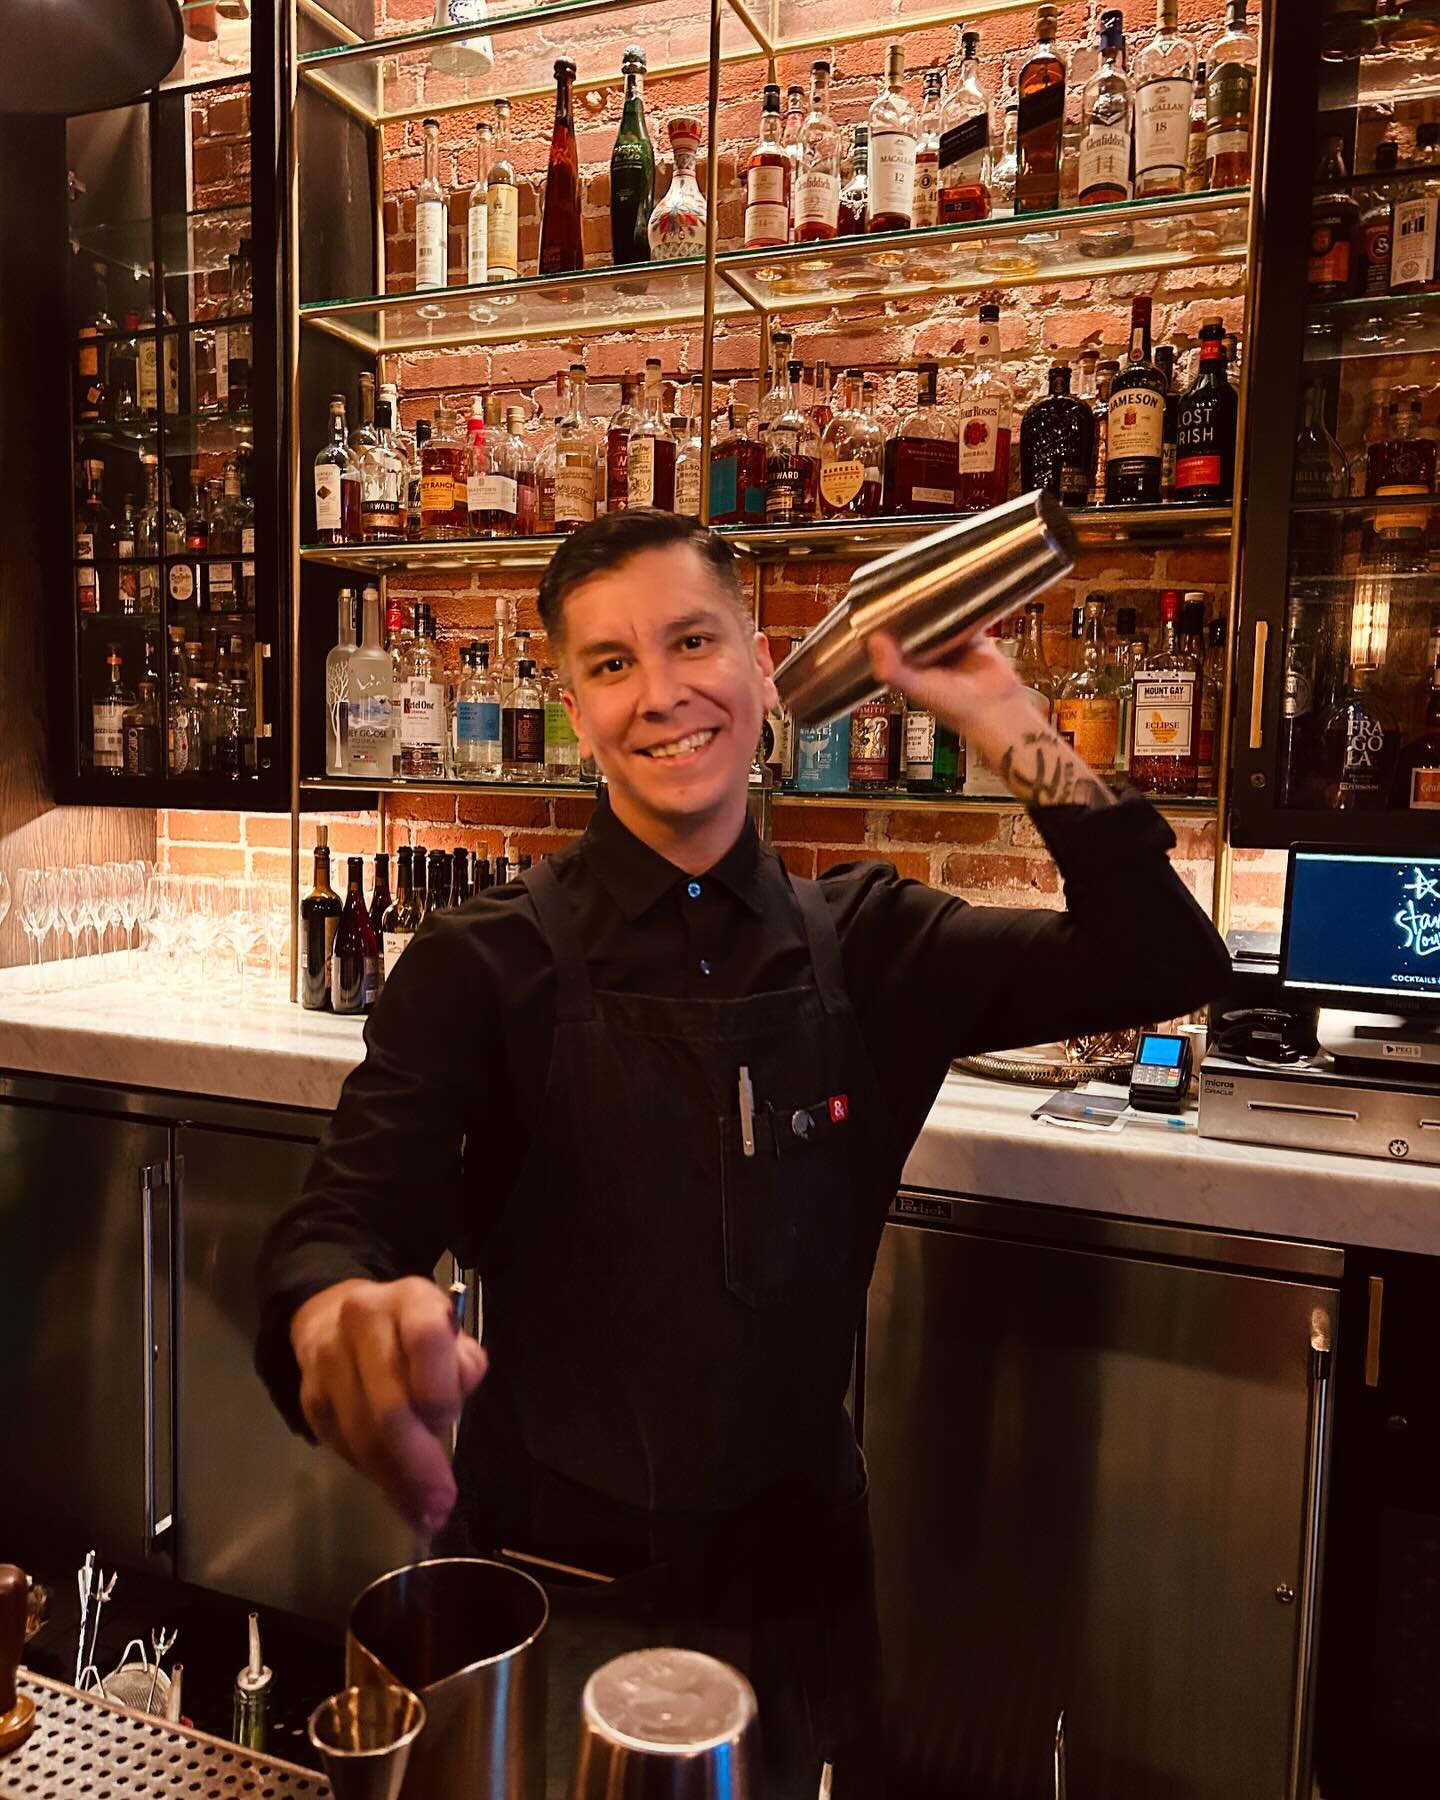 Meet the Bartender!
Born and raised in Sacramento, Chris has been bartending since 2016. He honed his craft around town at esteemed establishments, such as @hyattcentricsac and @revivalatthesawyer before joining the Historic Star Lounge. When he&rsqu